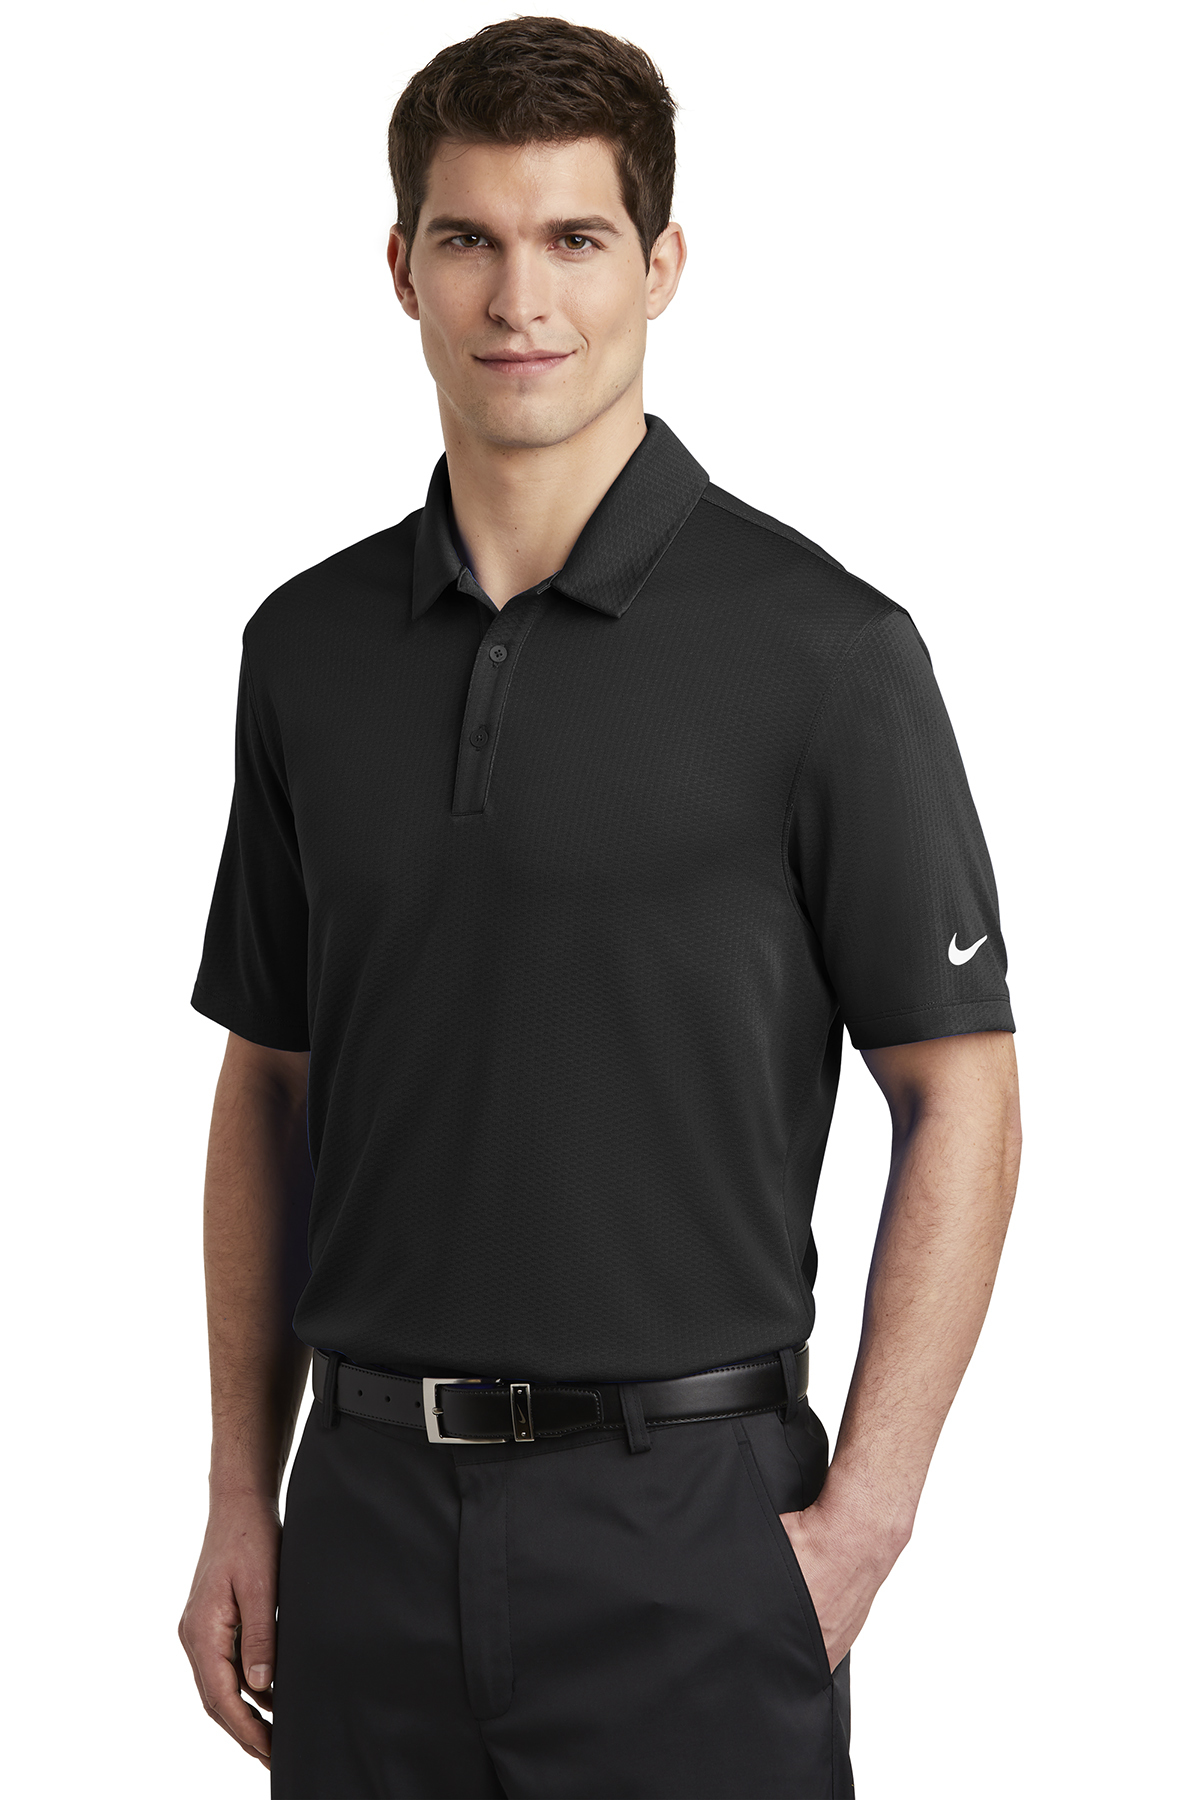 Nike Dri-FIT Hex Textured Polo | Product | SanMar